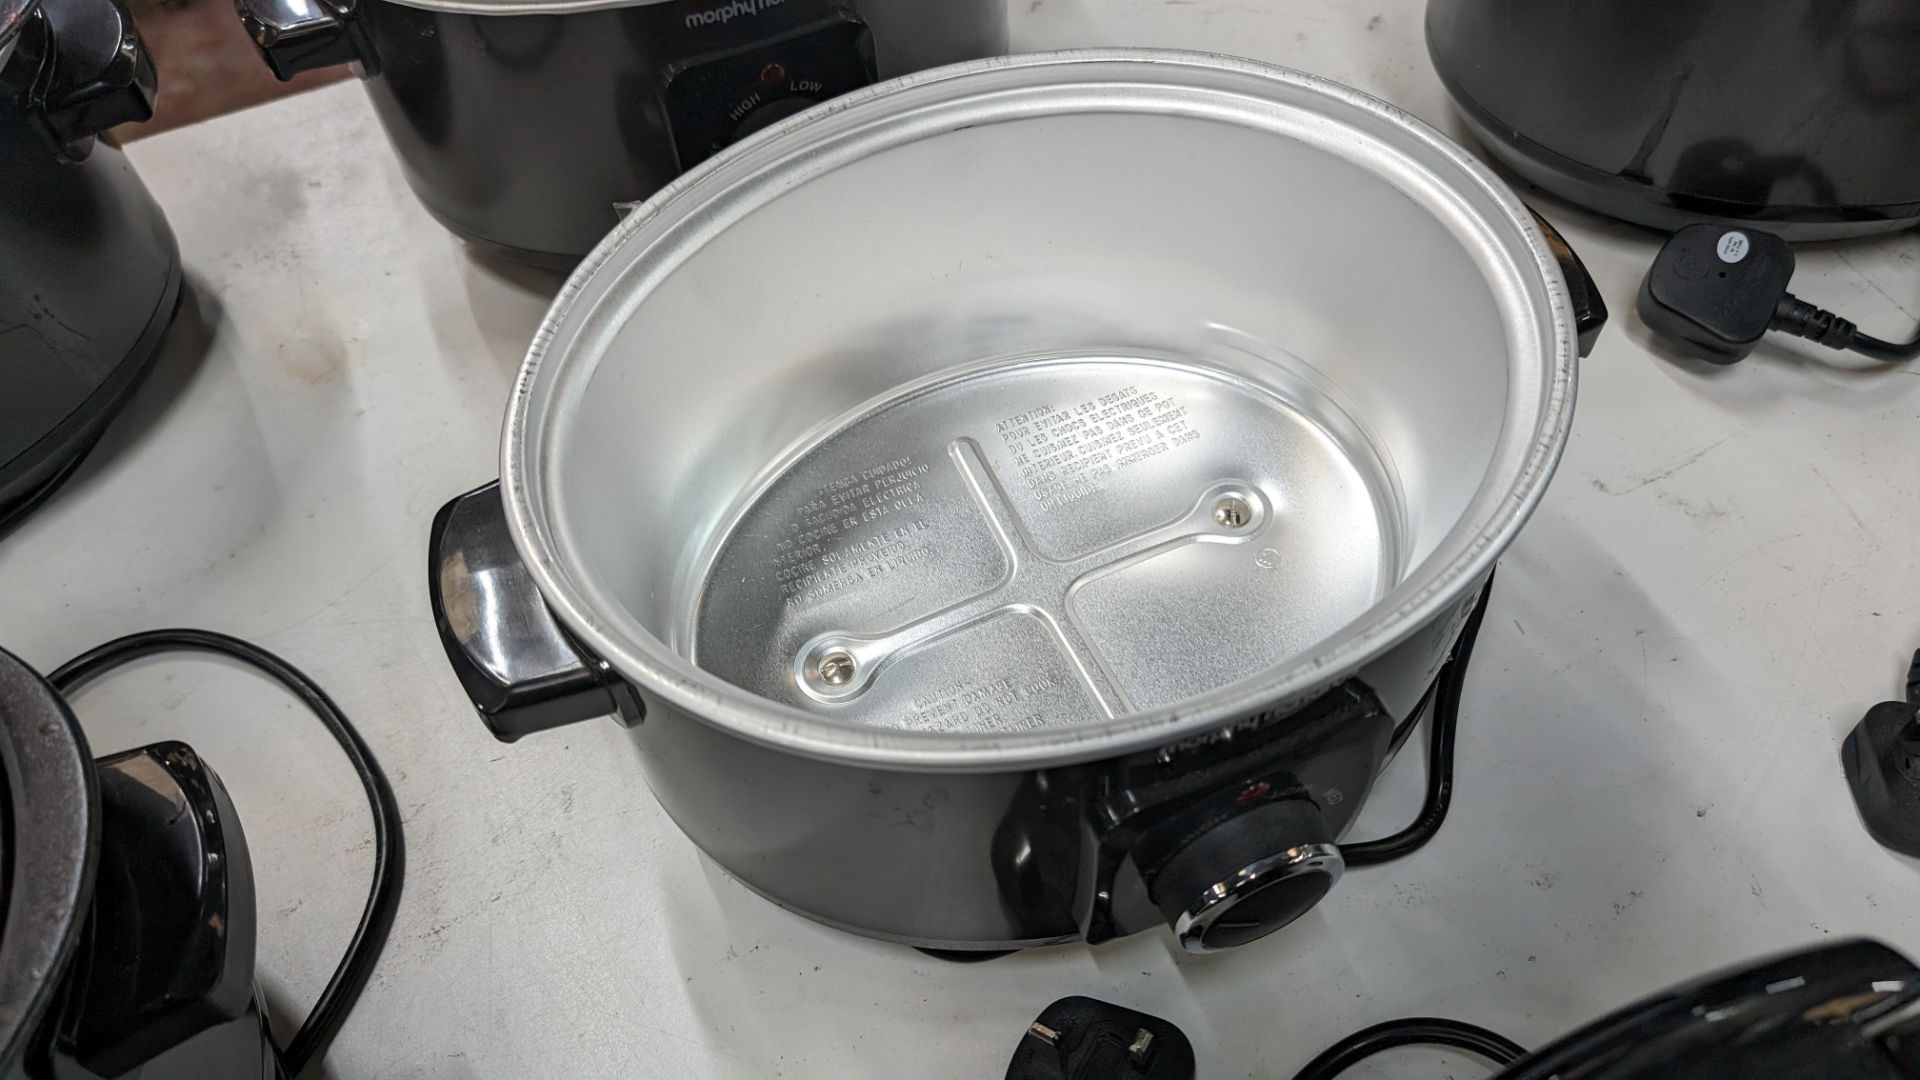 6 off Morphy Richards hinged lid slow cookers, model 460020. NB: At least some of these have been u - Image 7 of 10